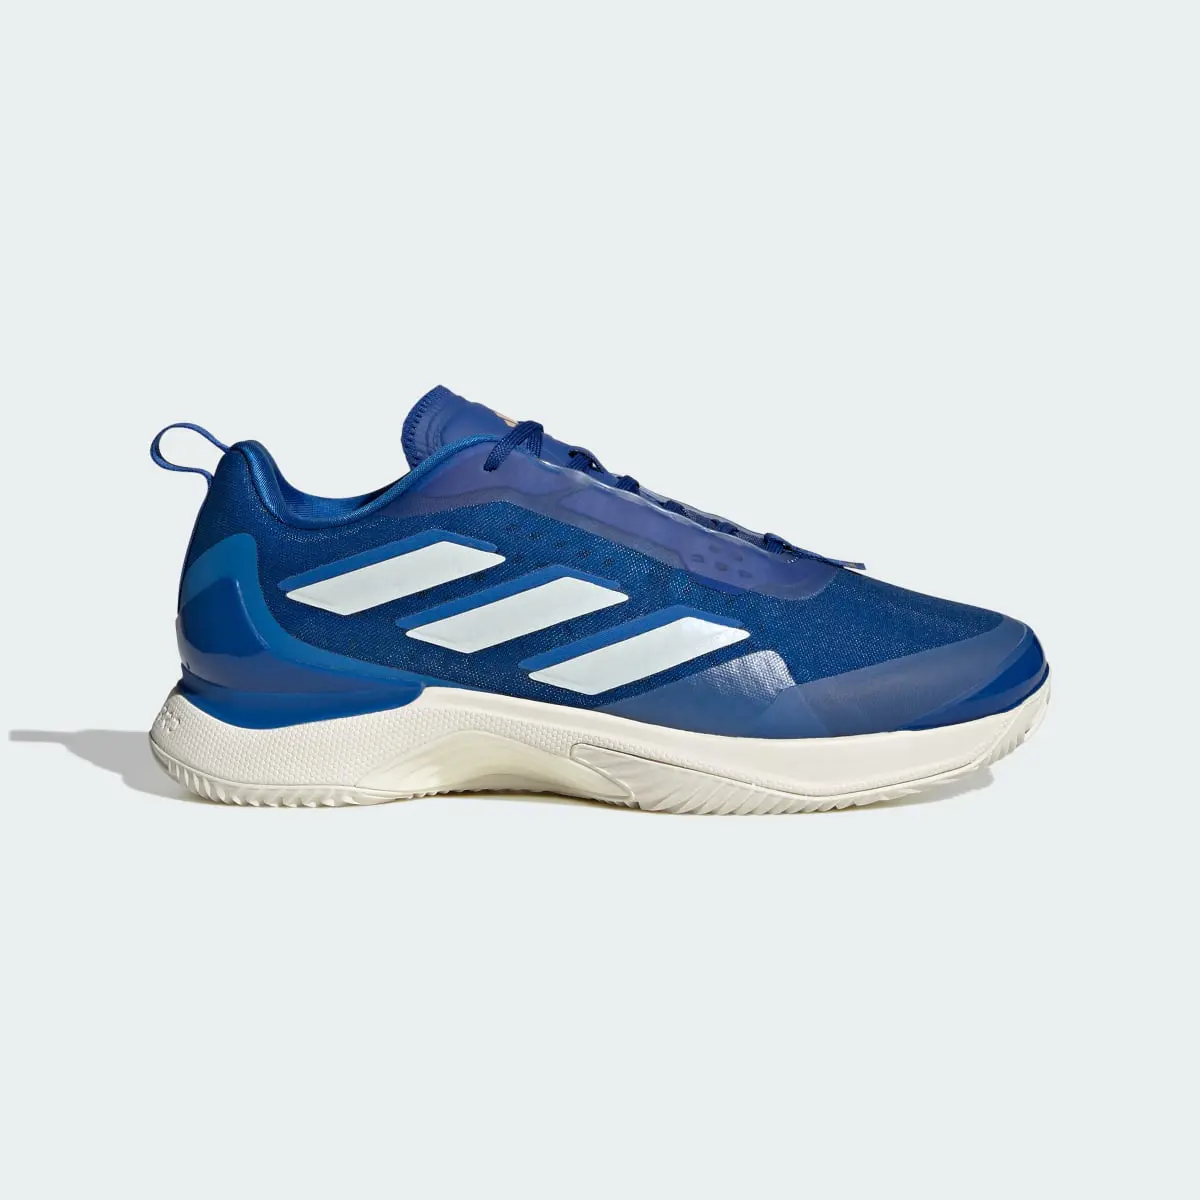 Adidas Avacourt Clay Court Tennis Shoes. 2